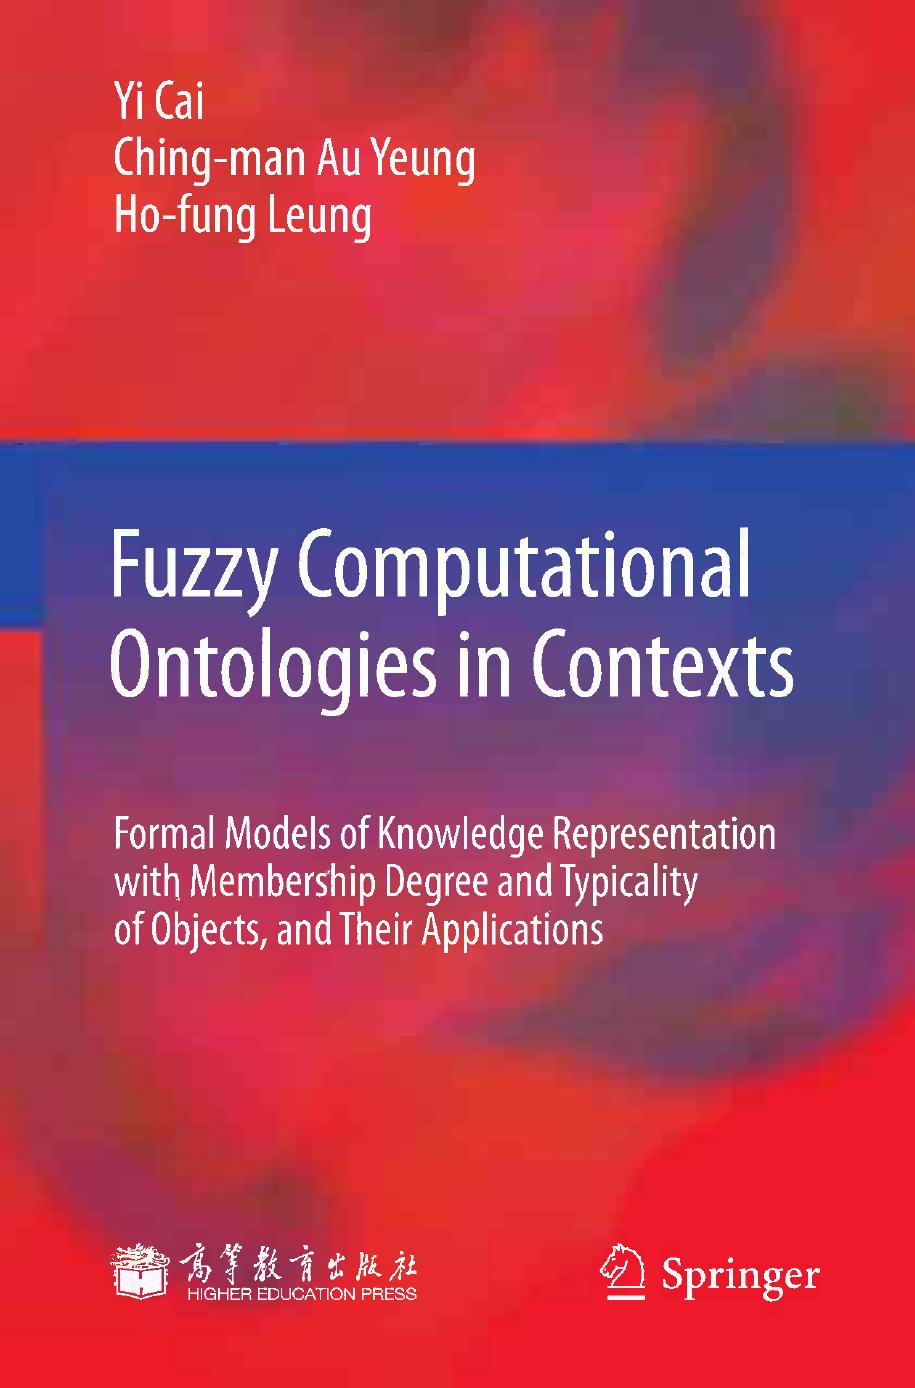 Fuzzy Computational Ontologies in Contexts: Formal Models of Knowledge Representation with Membership Degree and Typicality of Objects, and Their Applications